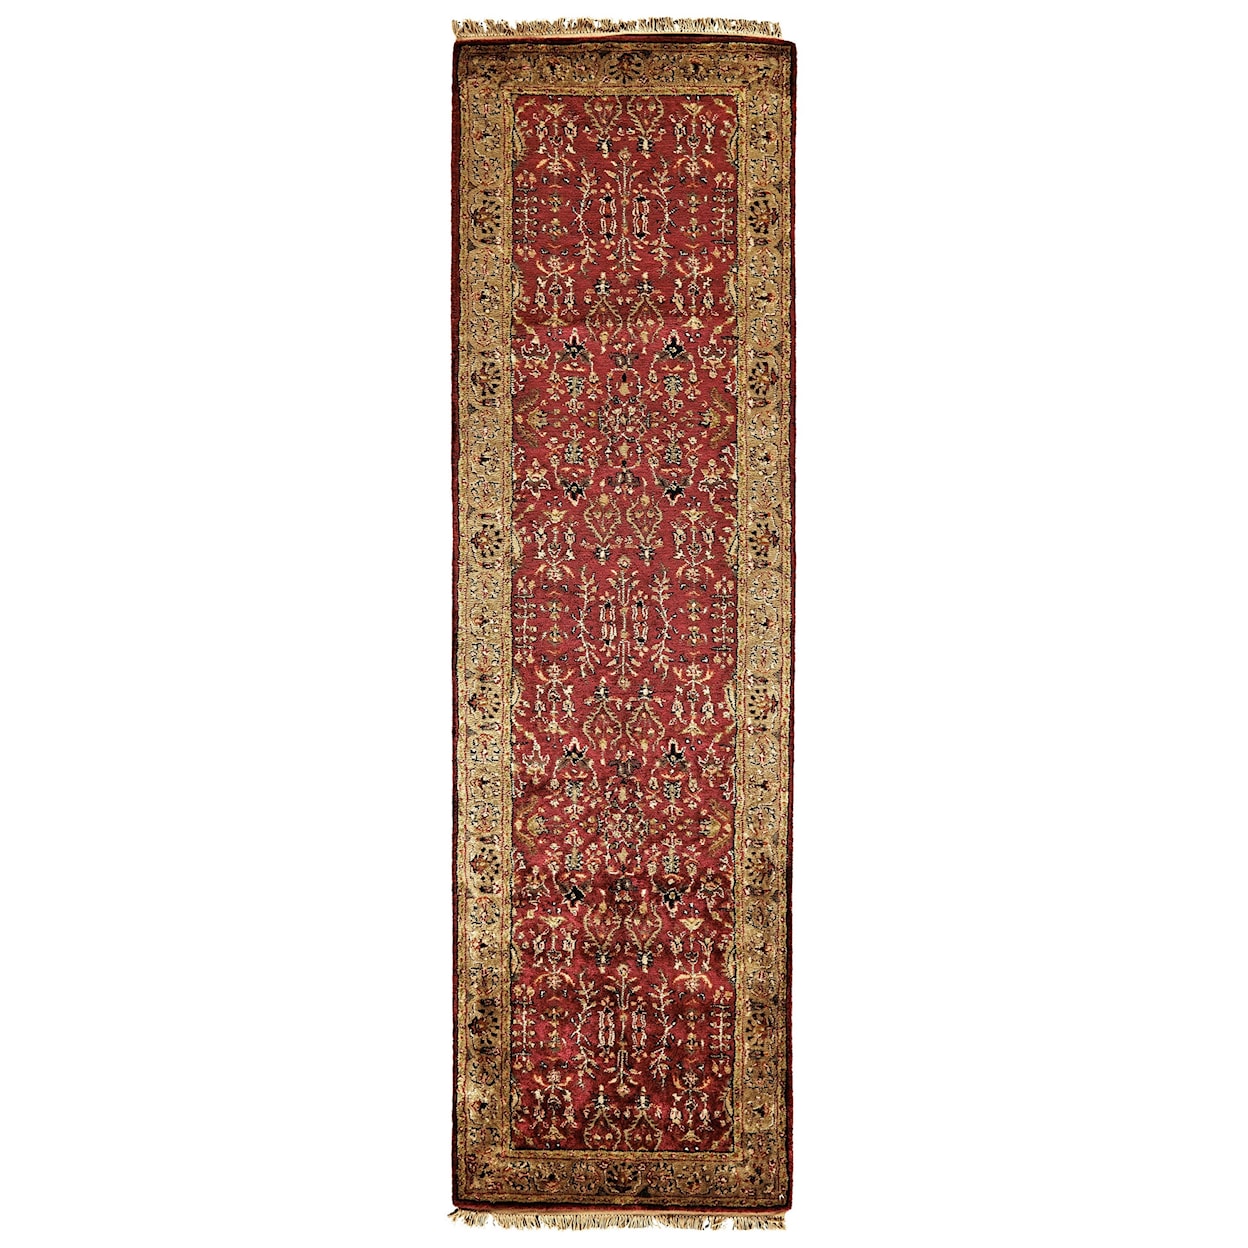 Feizy Rugs Amore Red/Light Gold 2'-3" x 8' Runner Rug